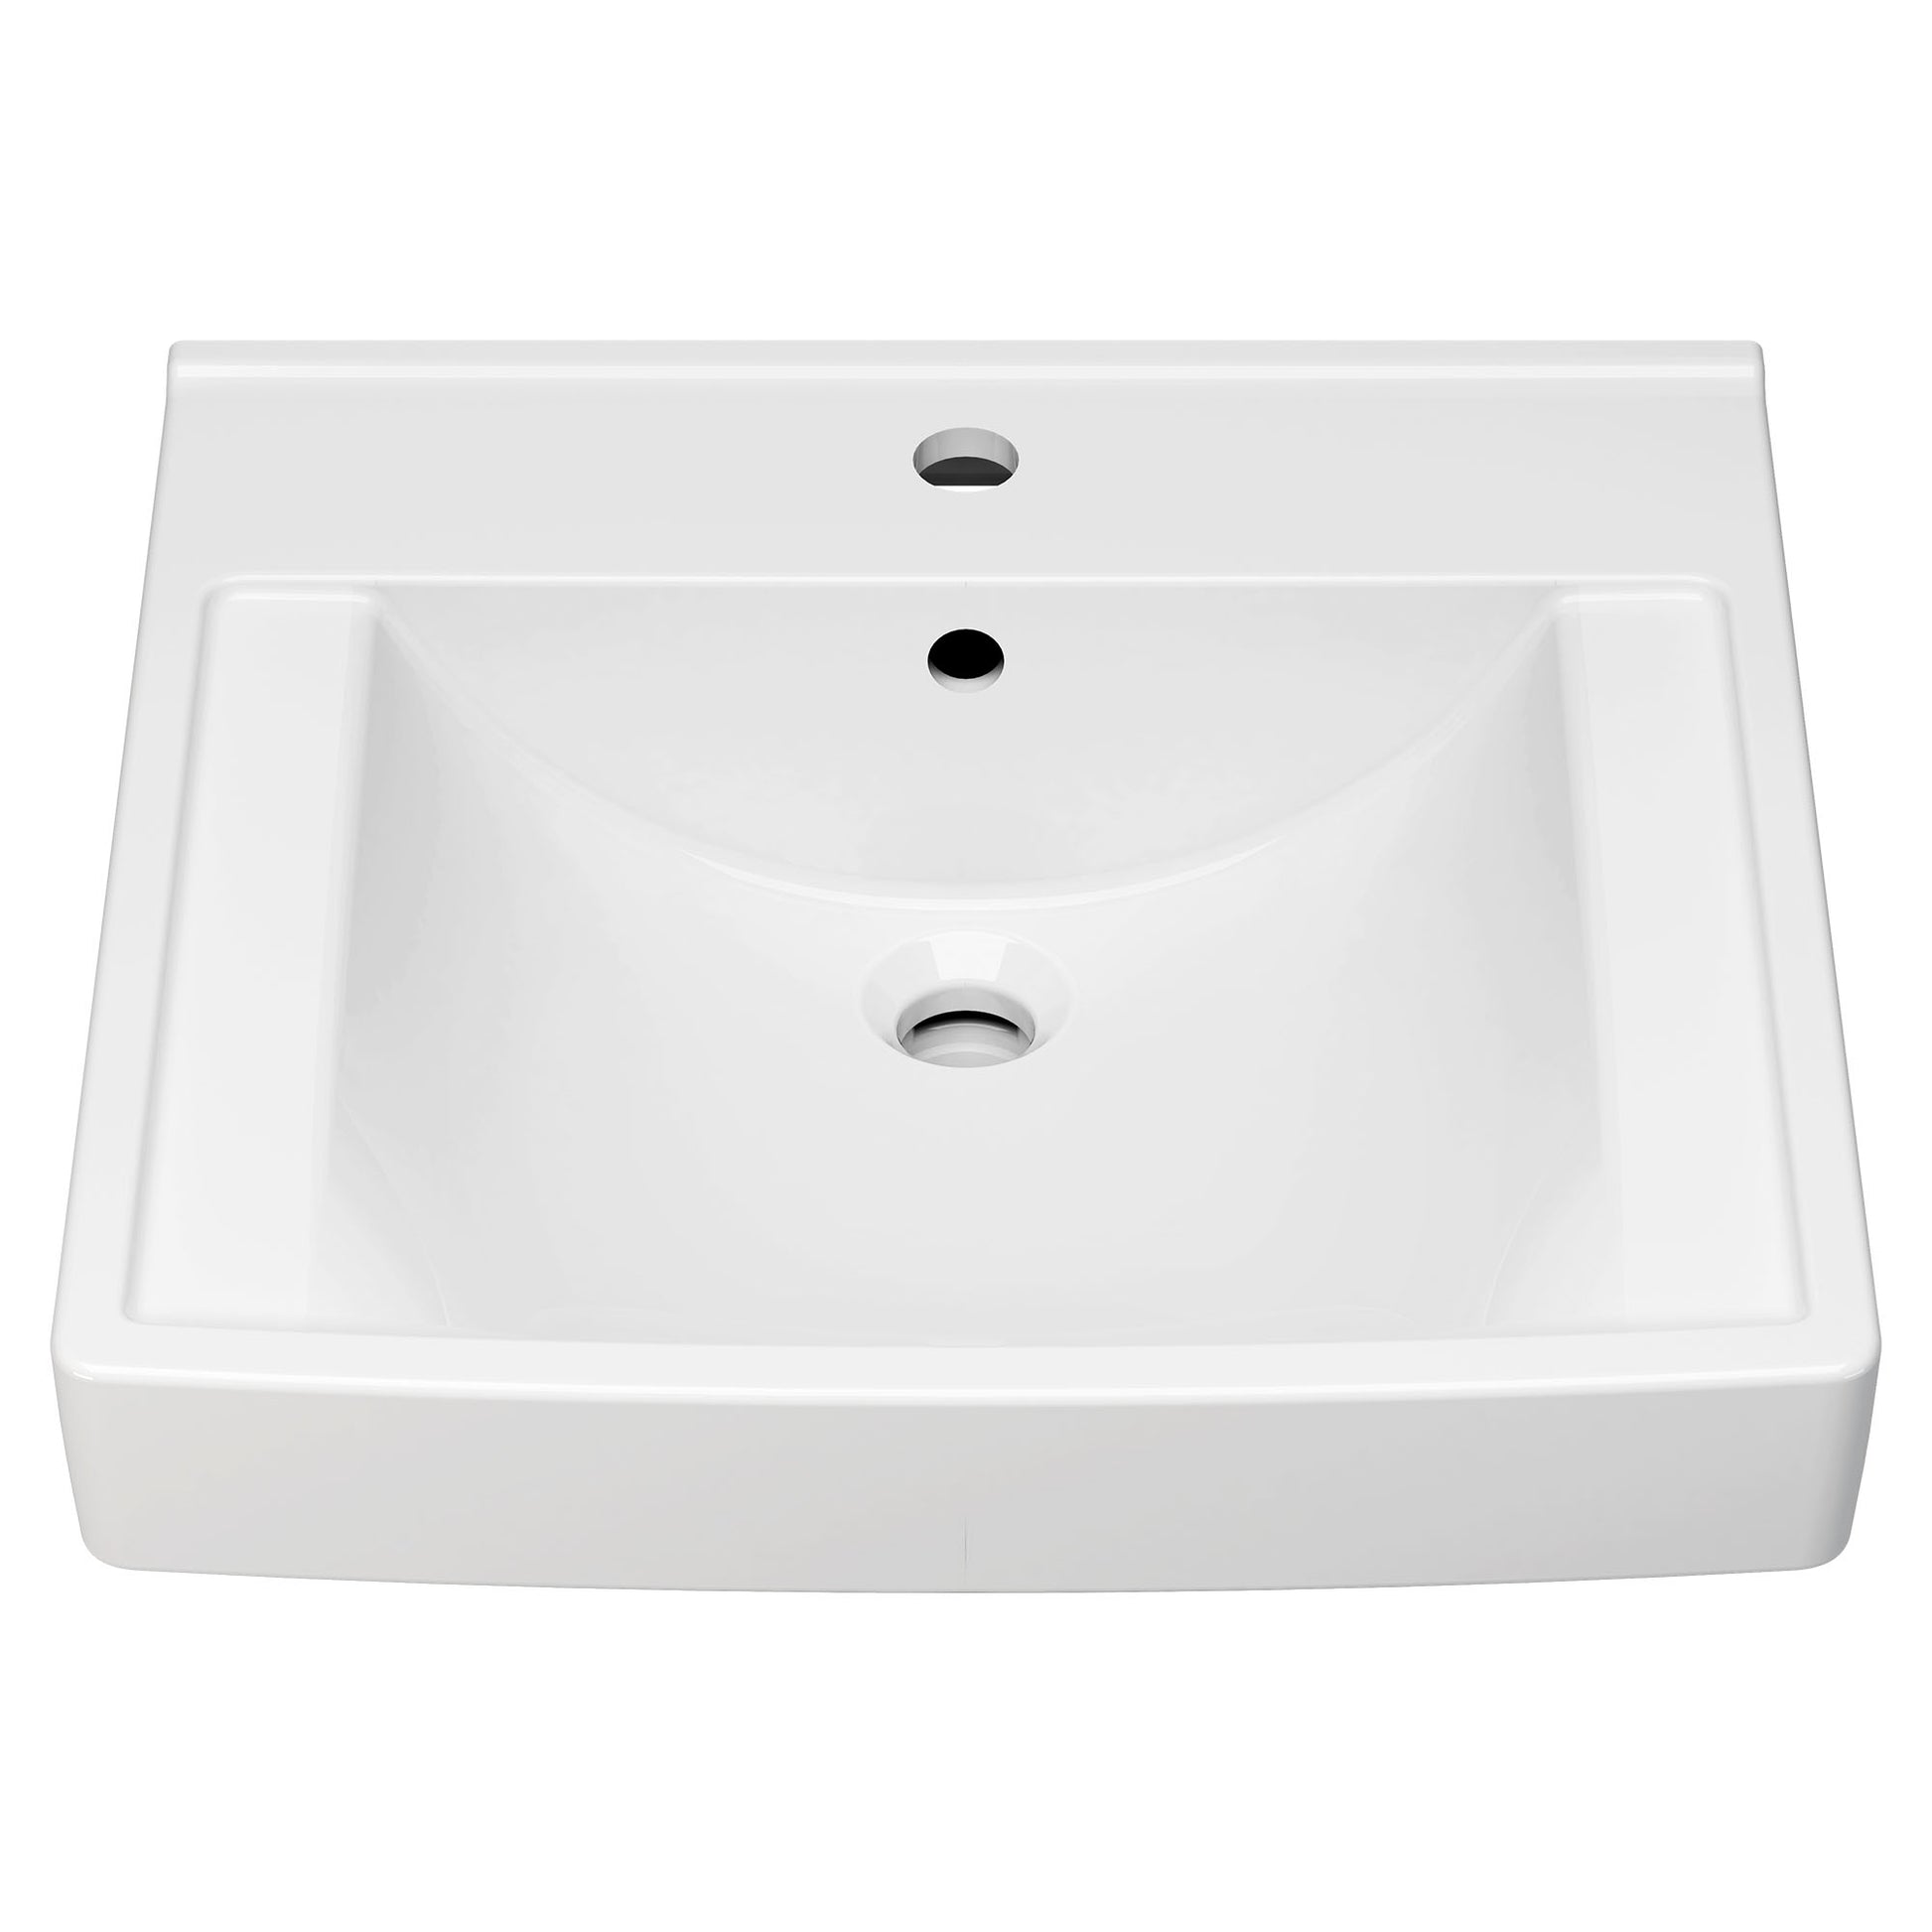 AMERICAN-STANDARD 9134001EC.020, Decorum 21 x 20-1/4-Inch (533 x 514 mm) Wall-Hung EverClean Sink With Center Hole Only in White